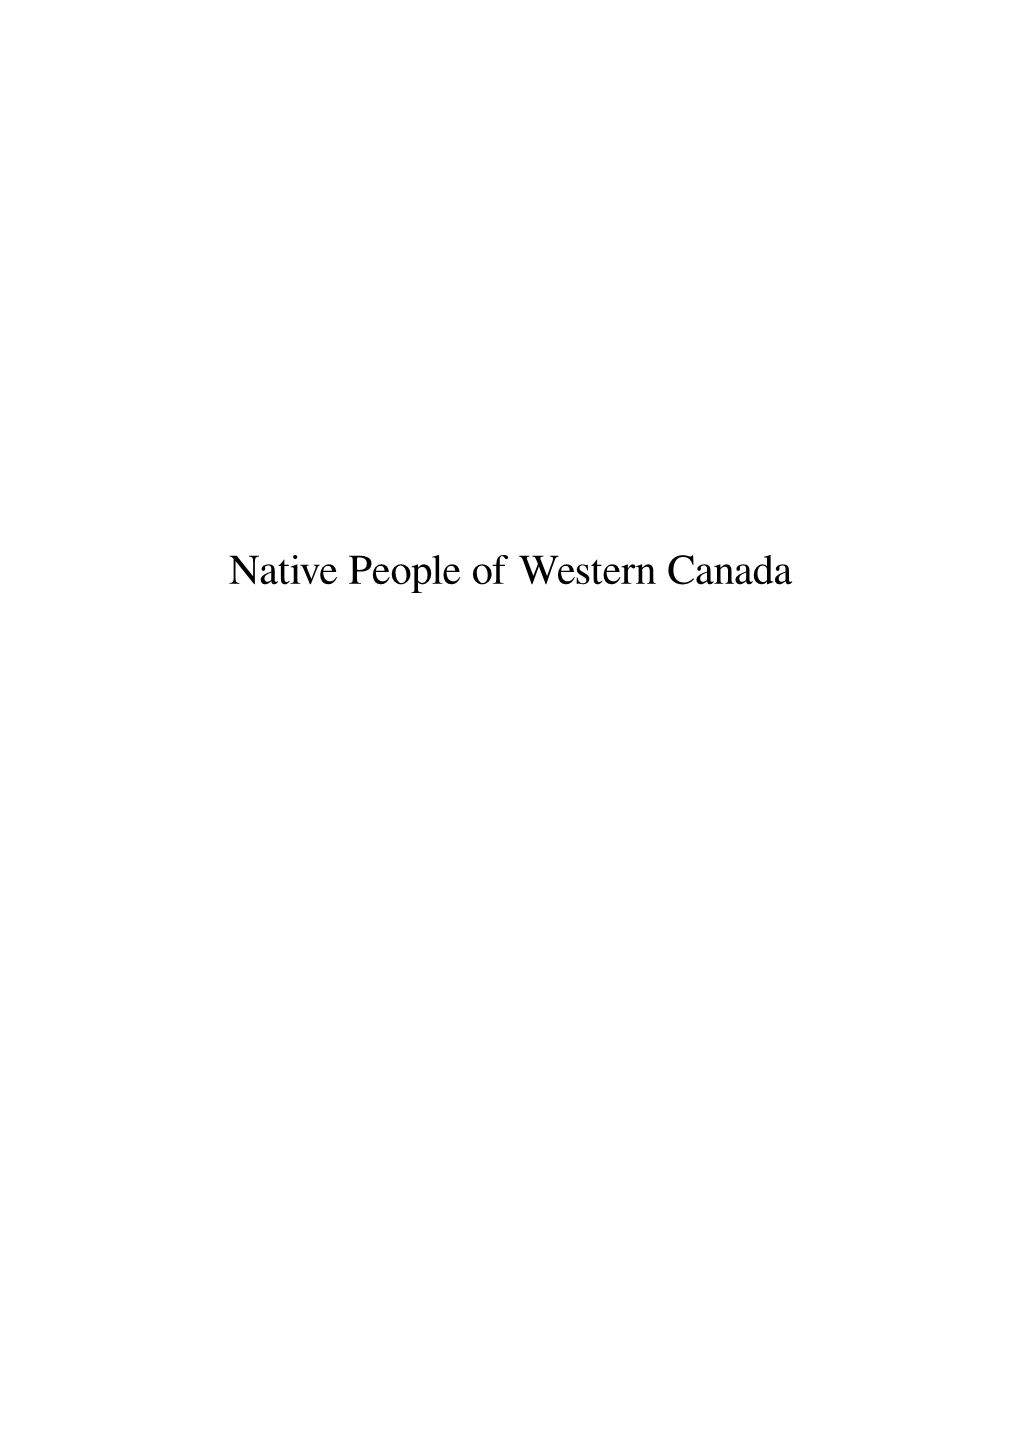 Native People of Western Canada Contents